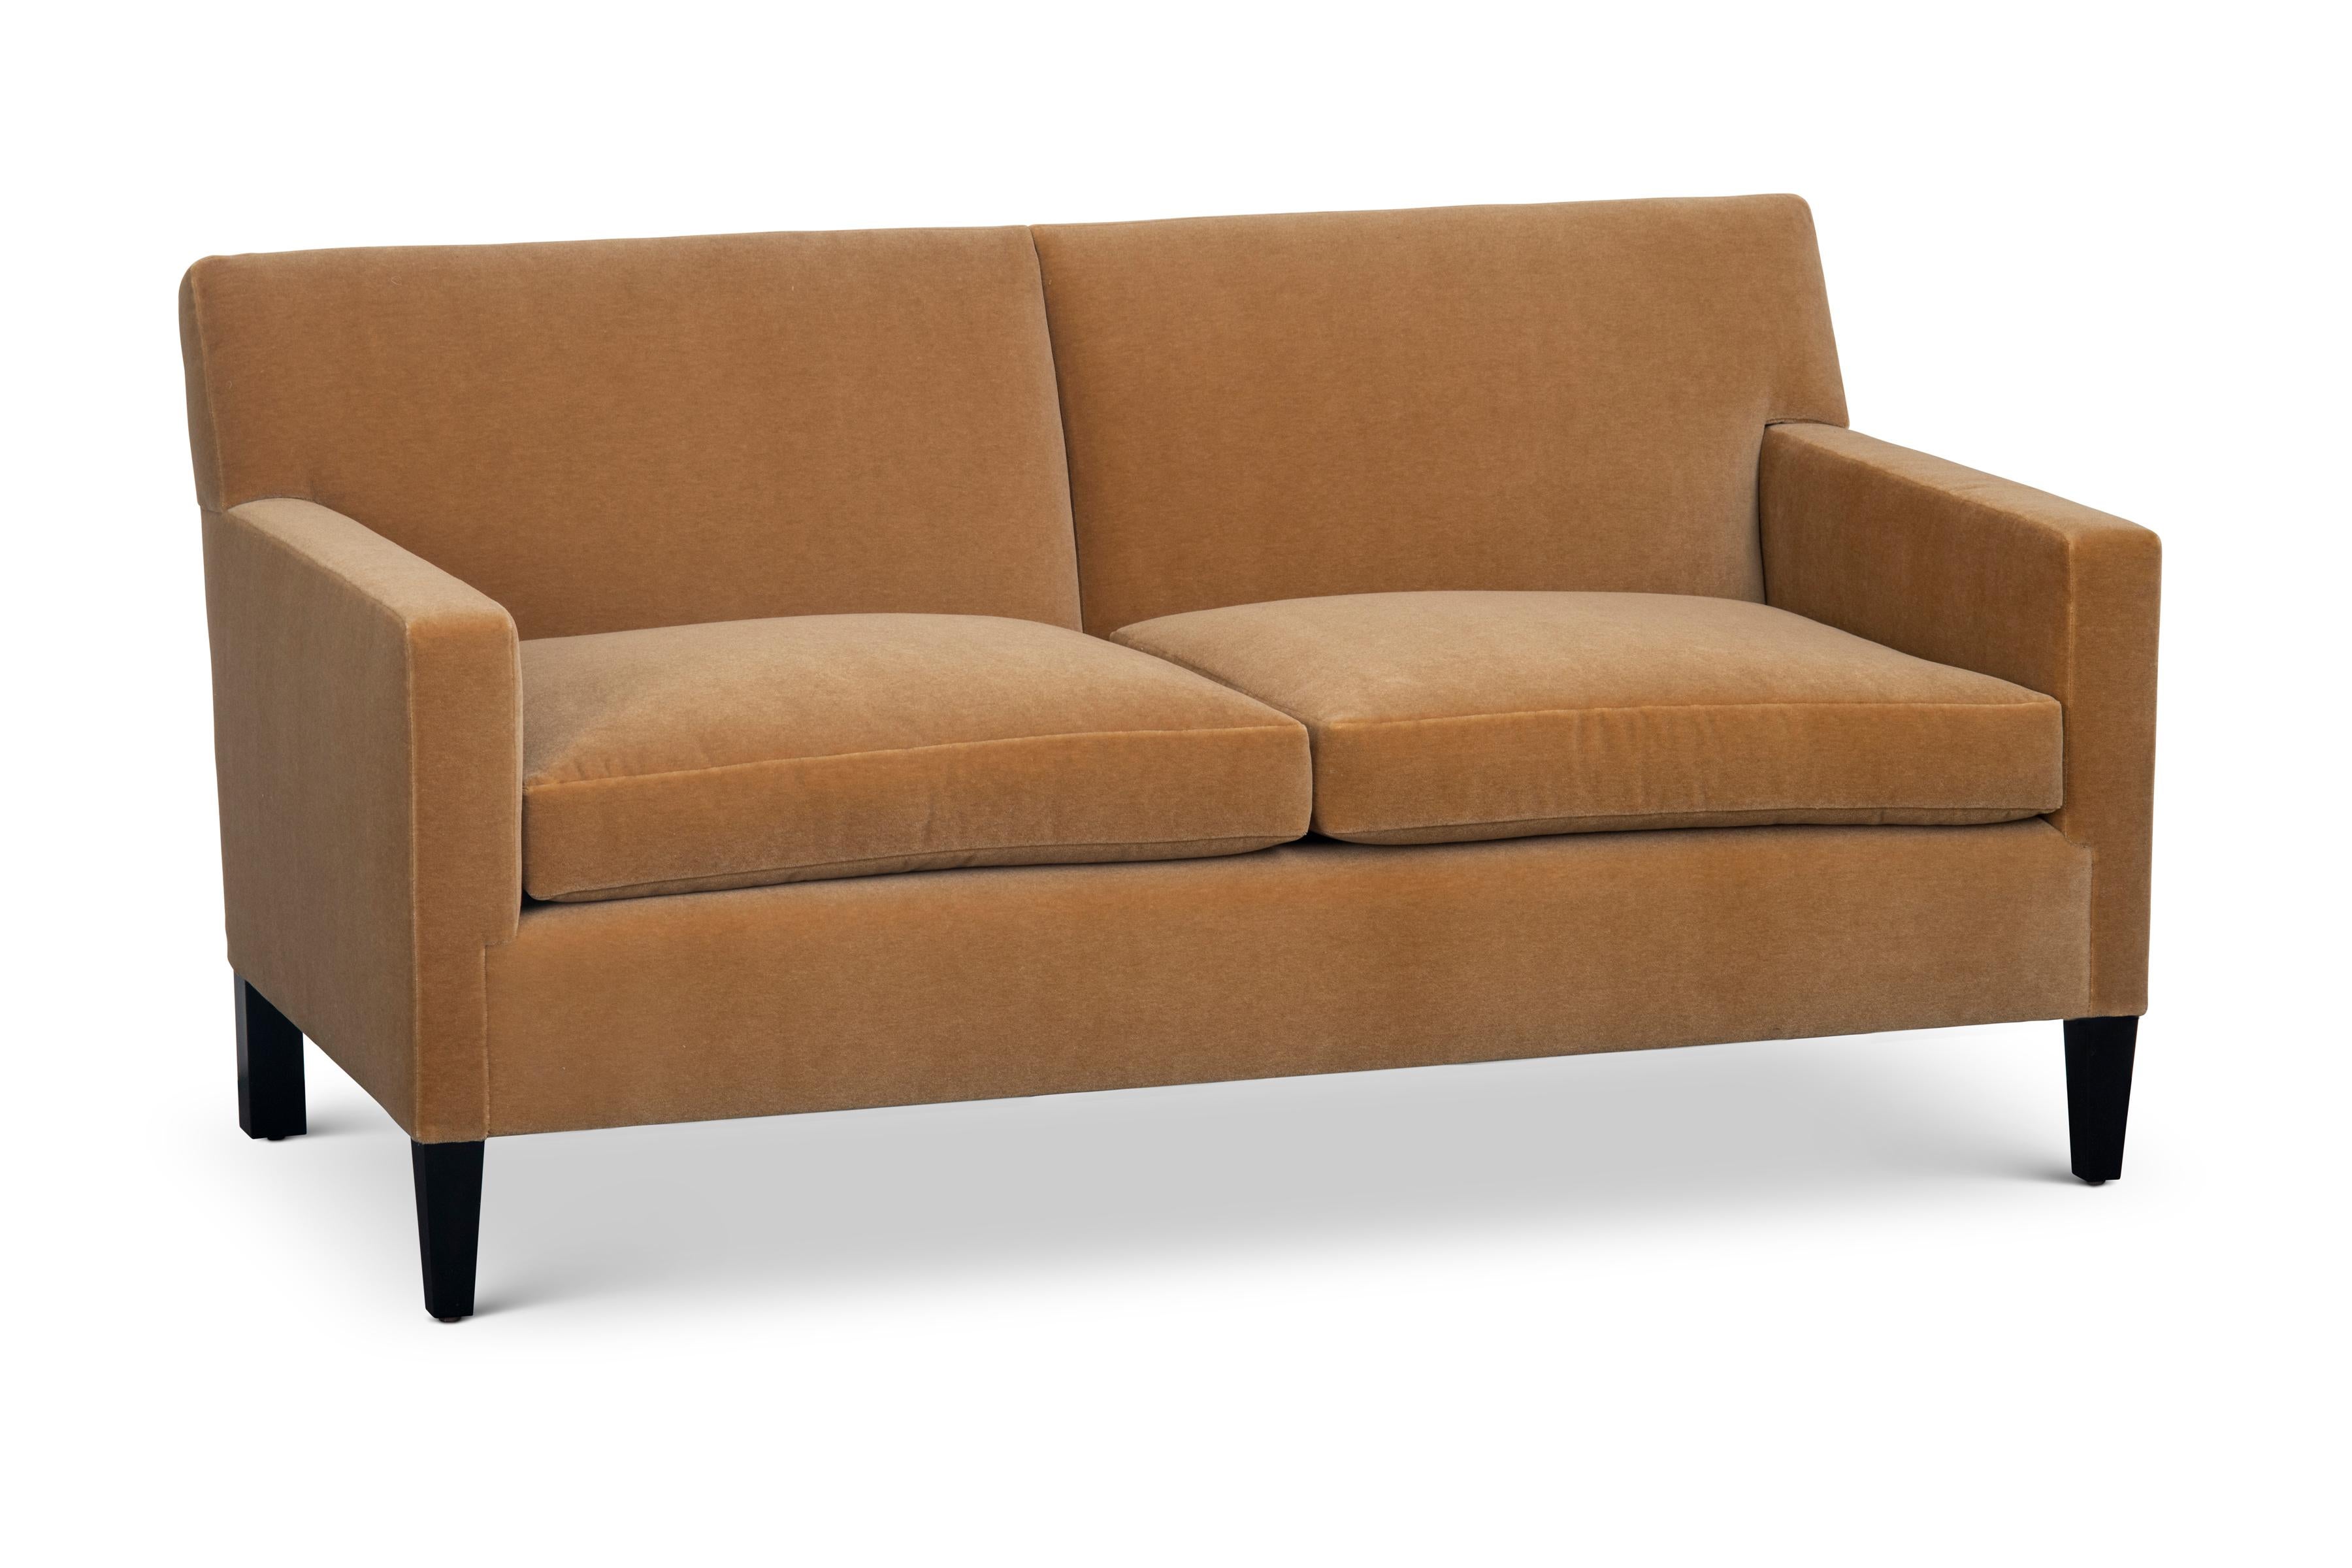 The Union sofa has a tight upholstered back with two loose seat cushions. Tapered front legs and squared back legs are made of blackened hardwood.

The Union Sofa is a made to order item and hand crafted in the USA. 
Customer's own material is